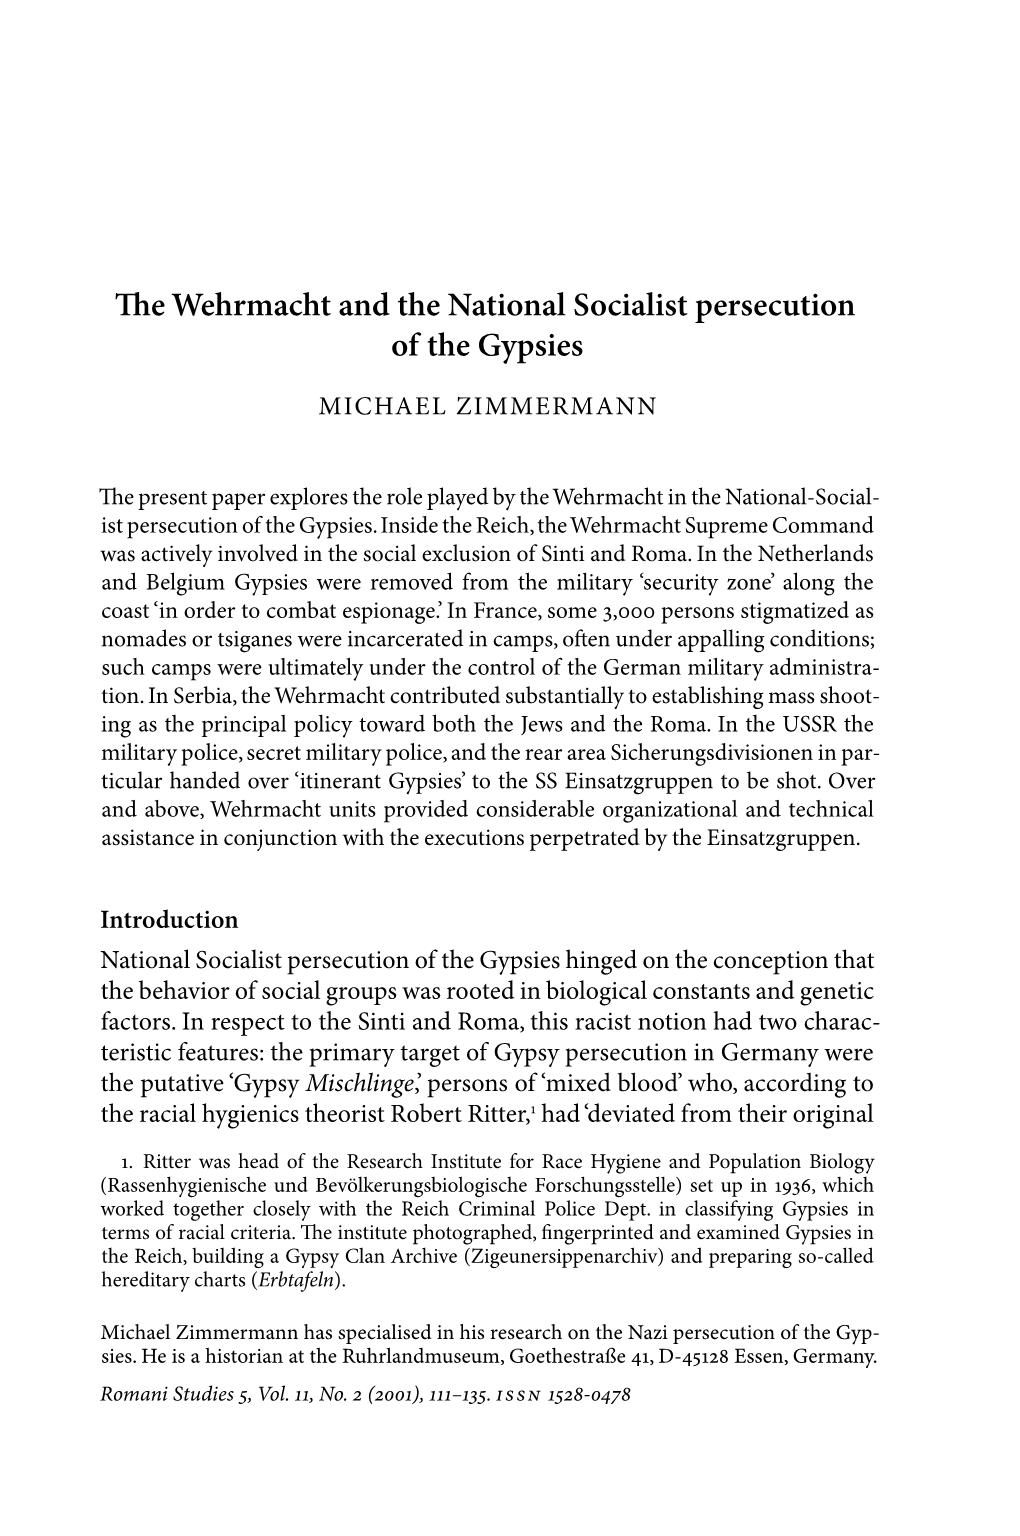 The Wehrmacht and the National Socialist Persecution of the Gypsies